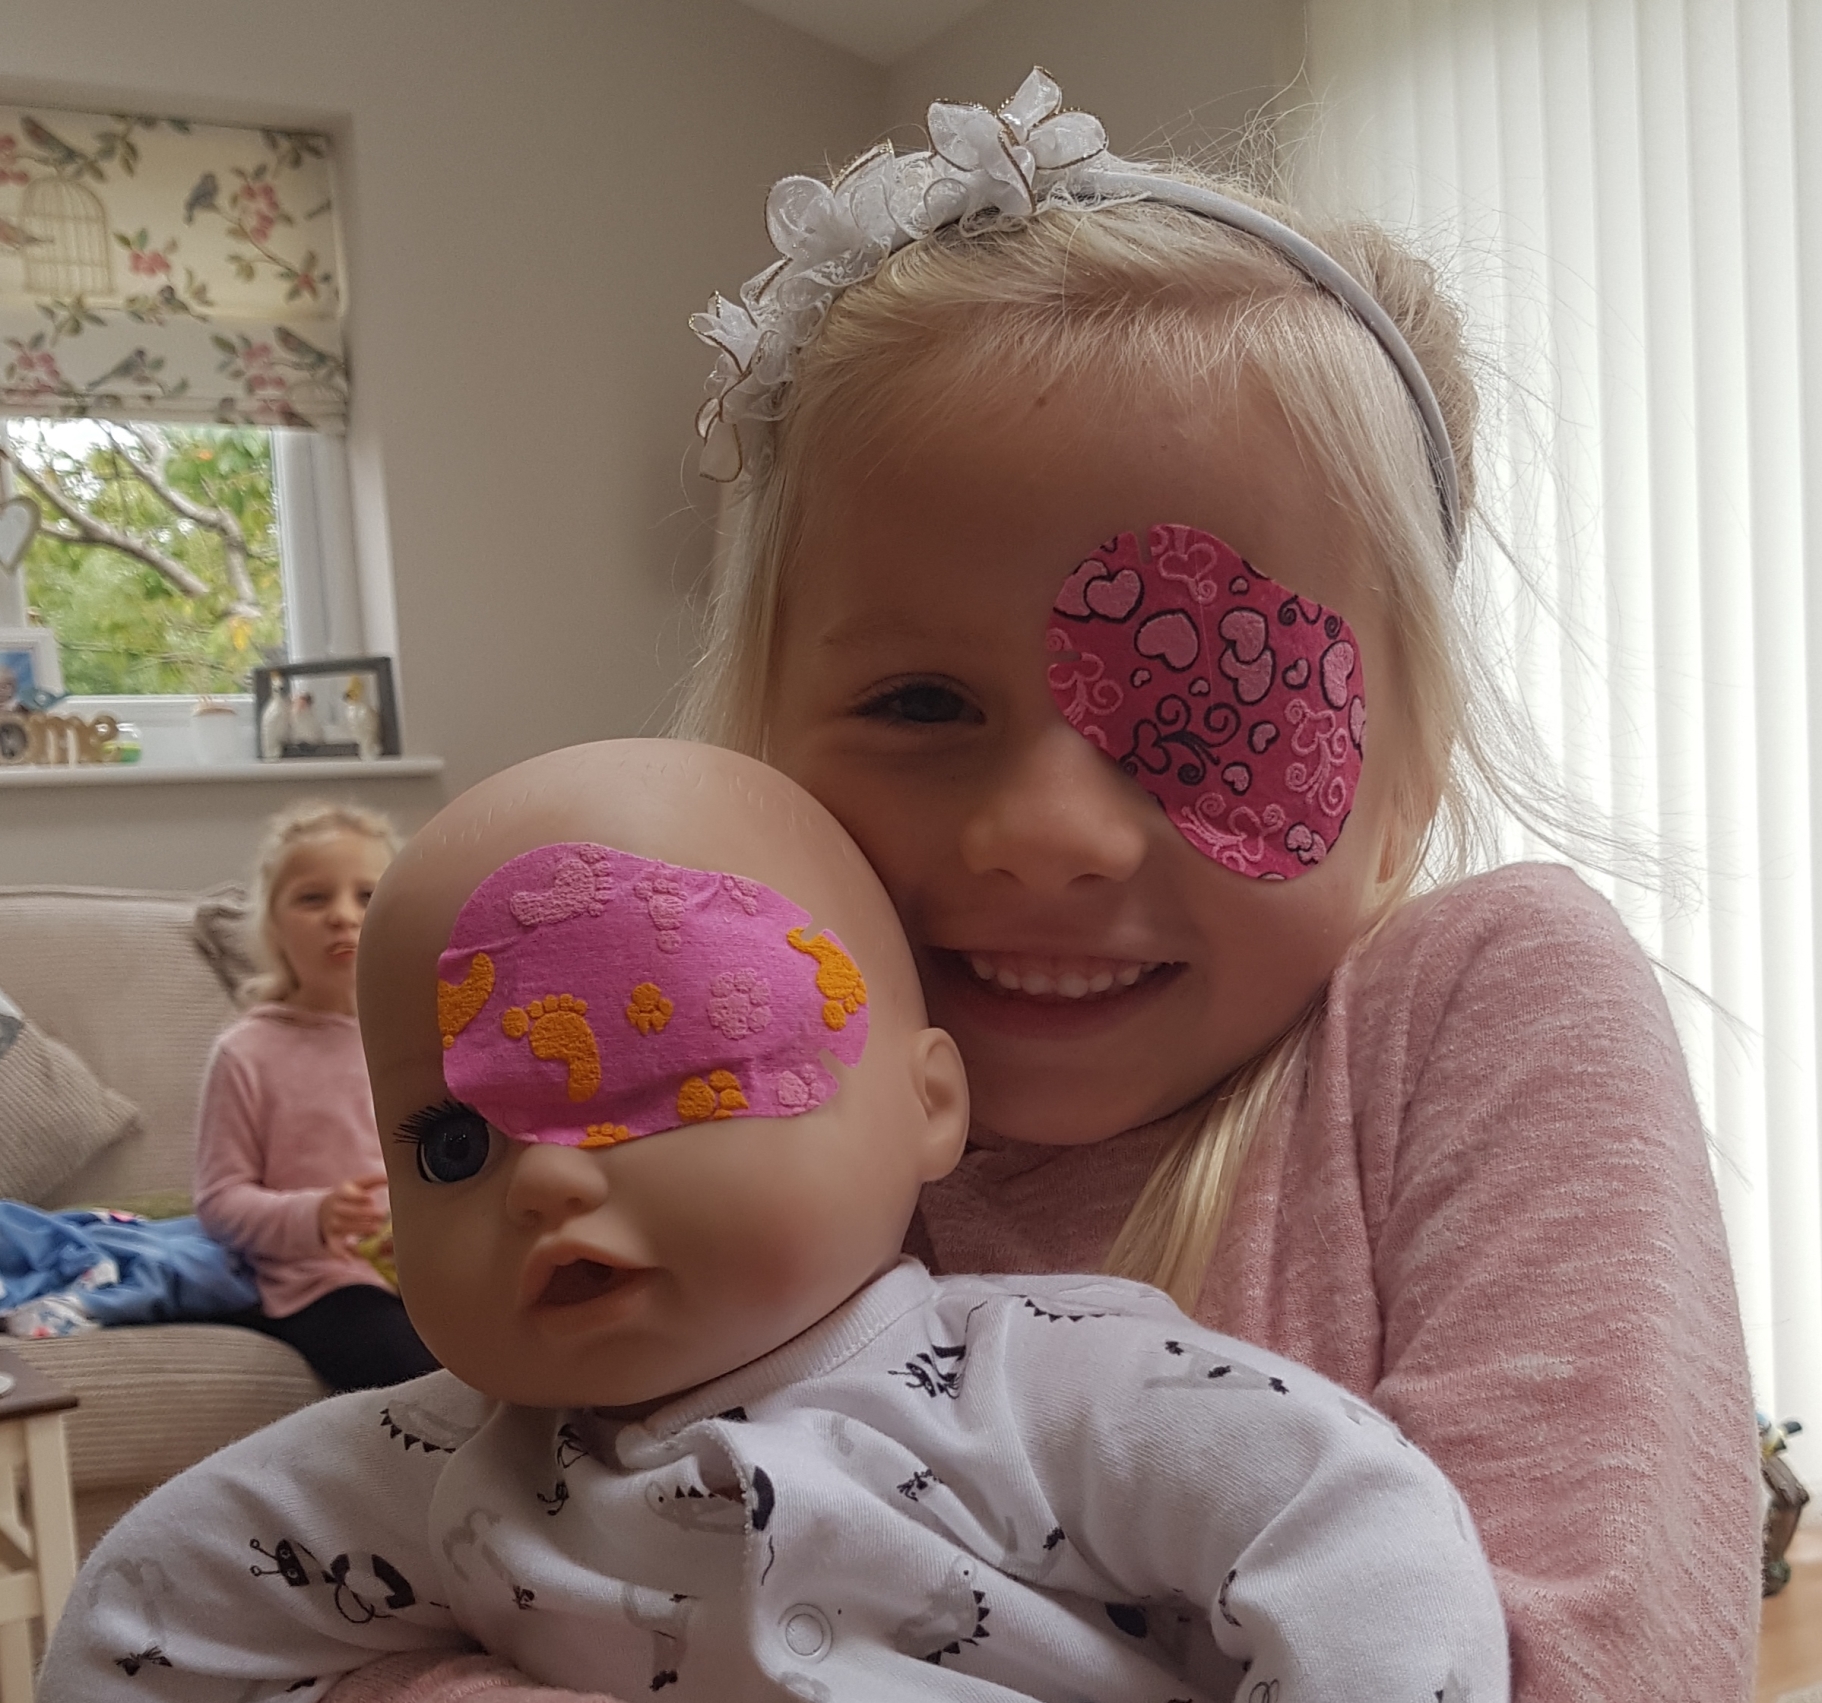 Patient of Manchester Royal Eye Hospital Jess and her doll with matching eye patches